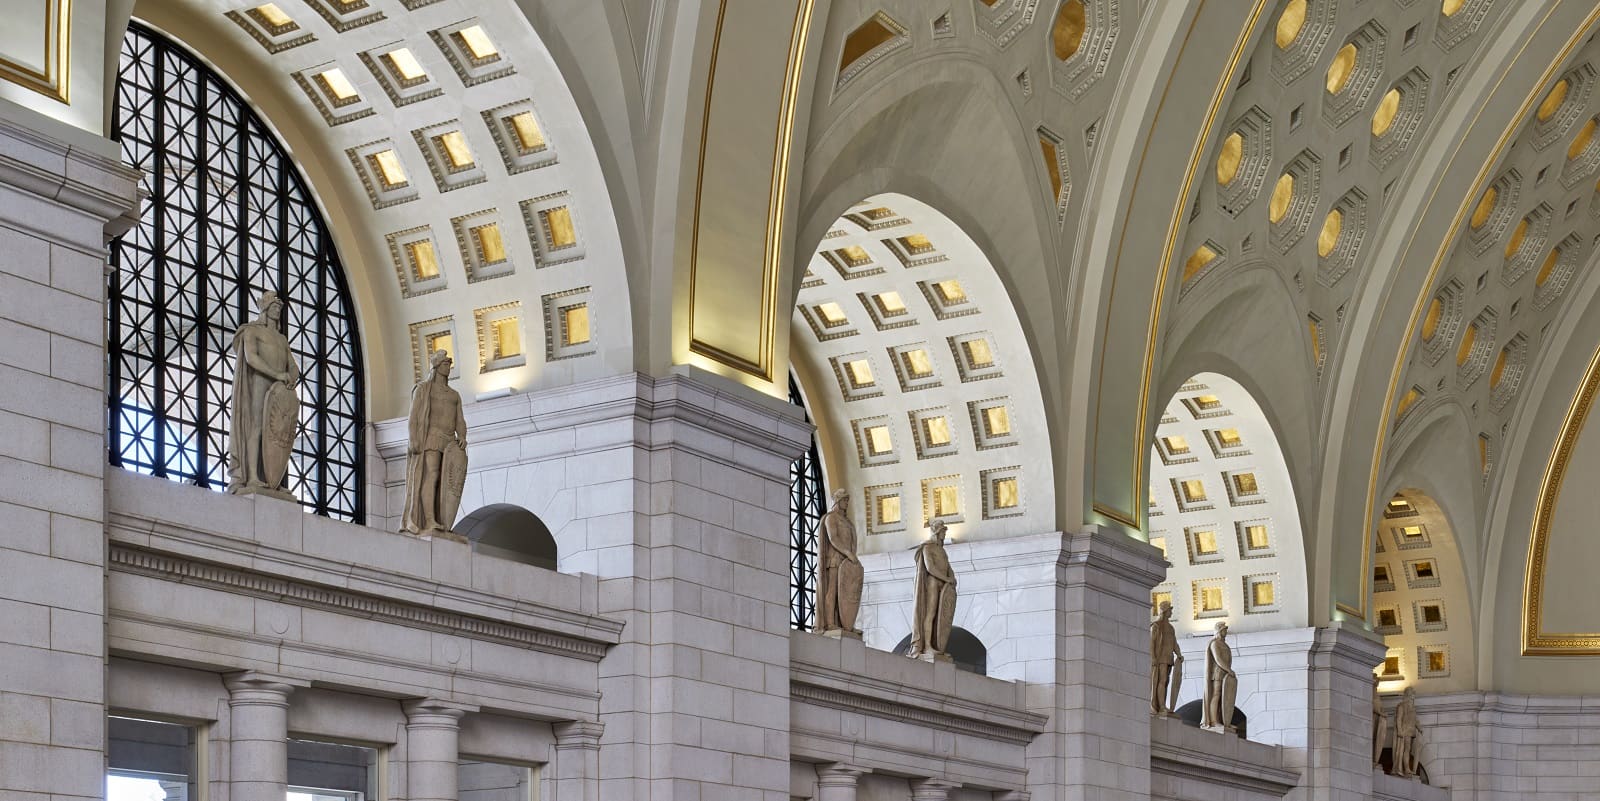 Restoring the Legionnaire Statues of Union Station [Before & After]